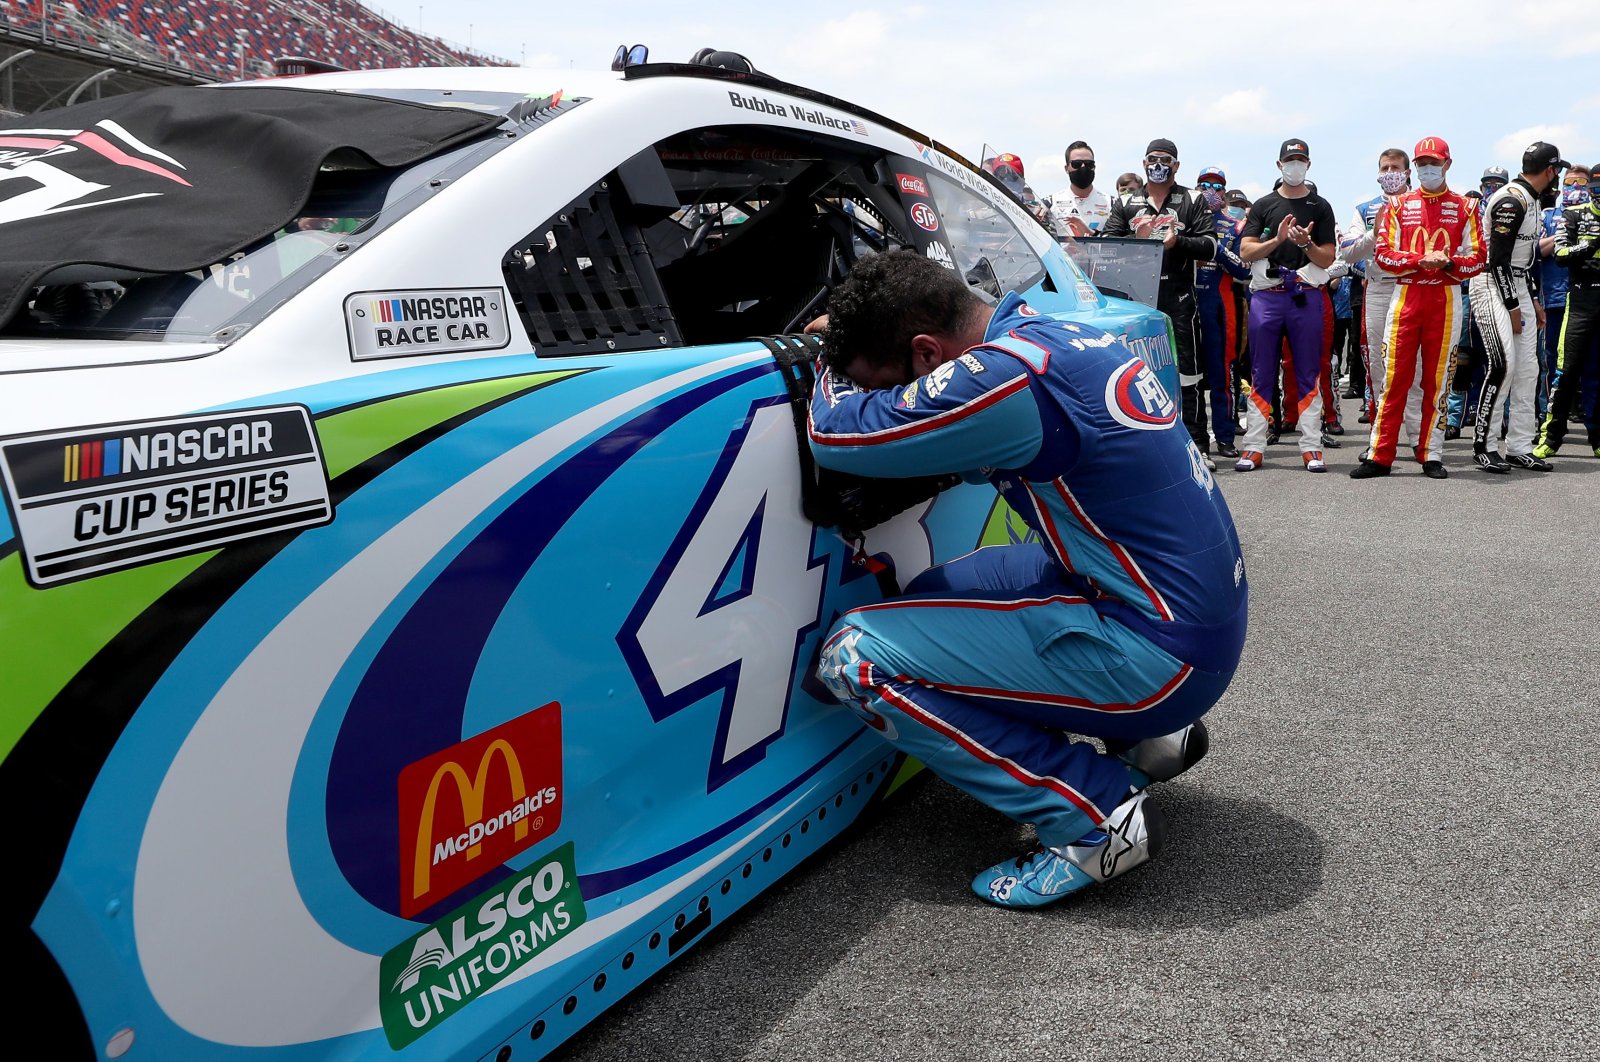 Driver Bubba Wallace overcome with emotion prior to the start of the NASCAR Cup Series auto race in Talladega Alabama, U.S., June 22, 2020. (AFP Photo)